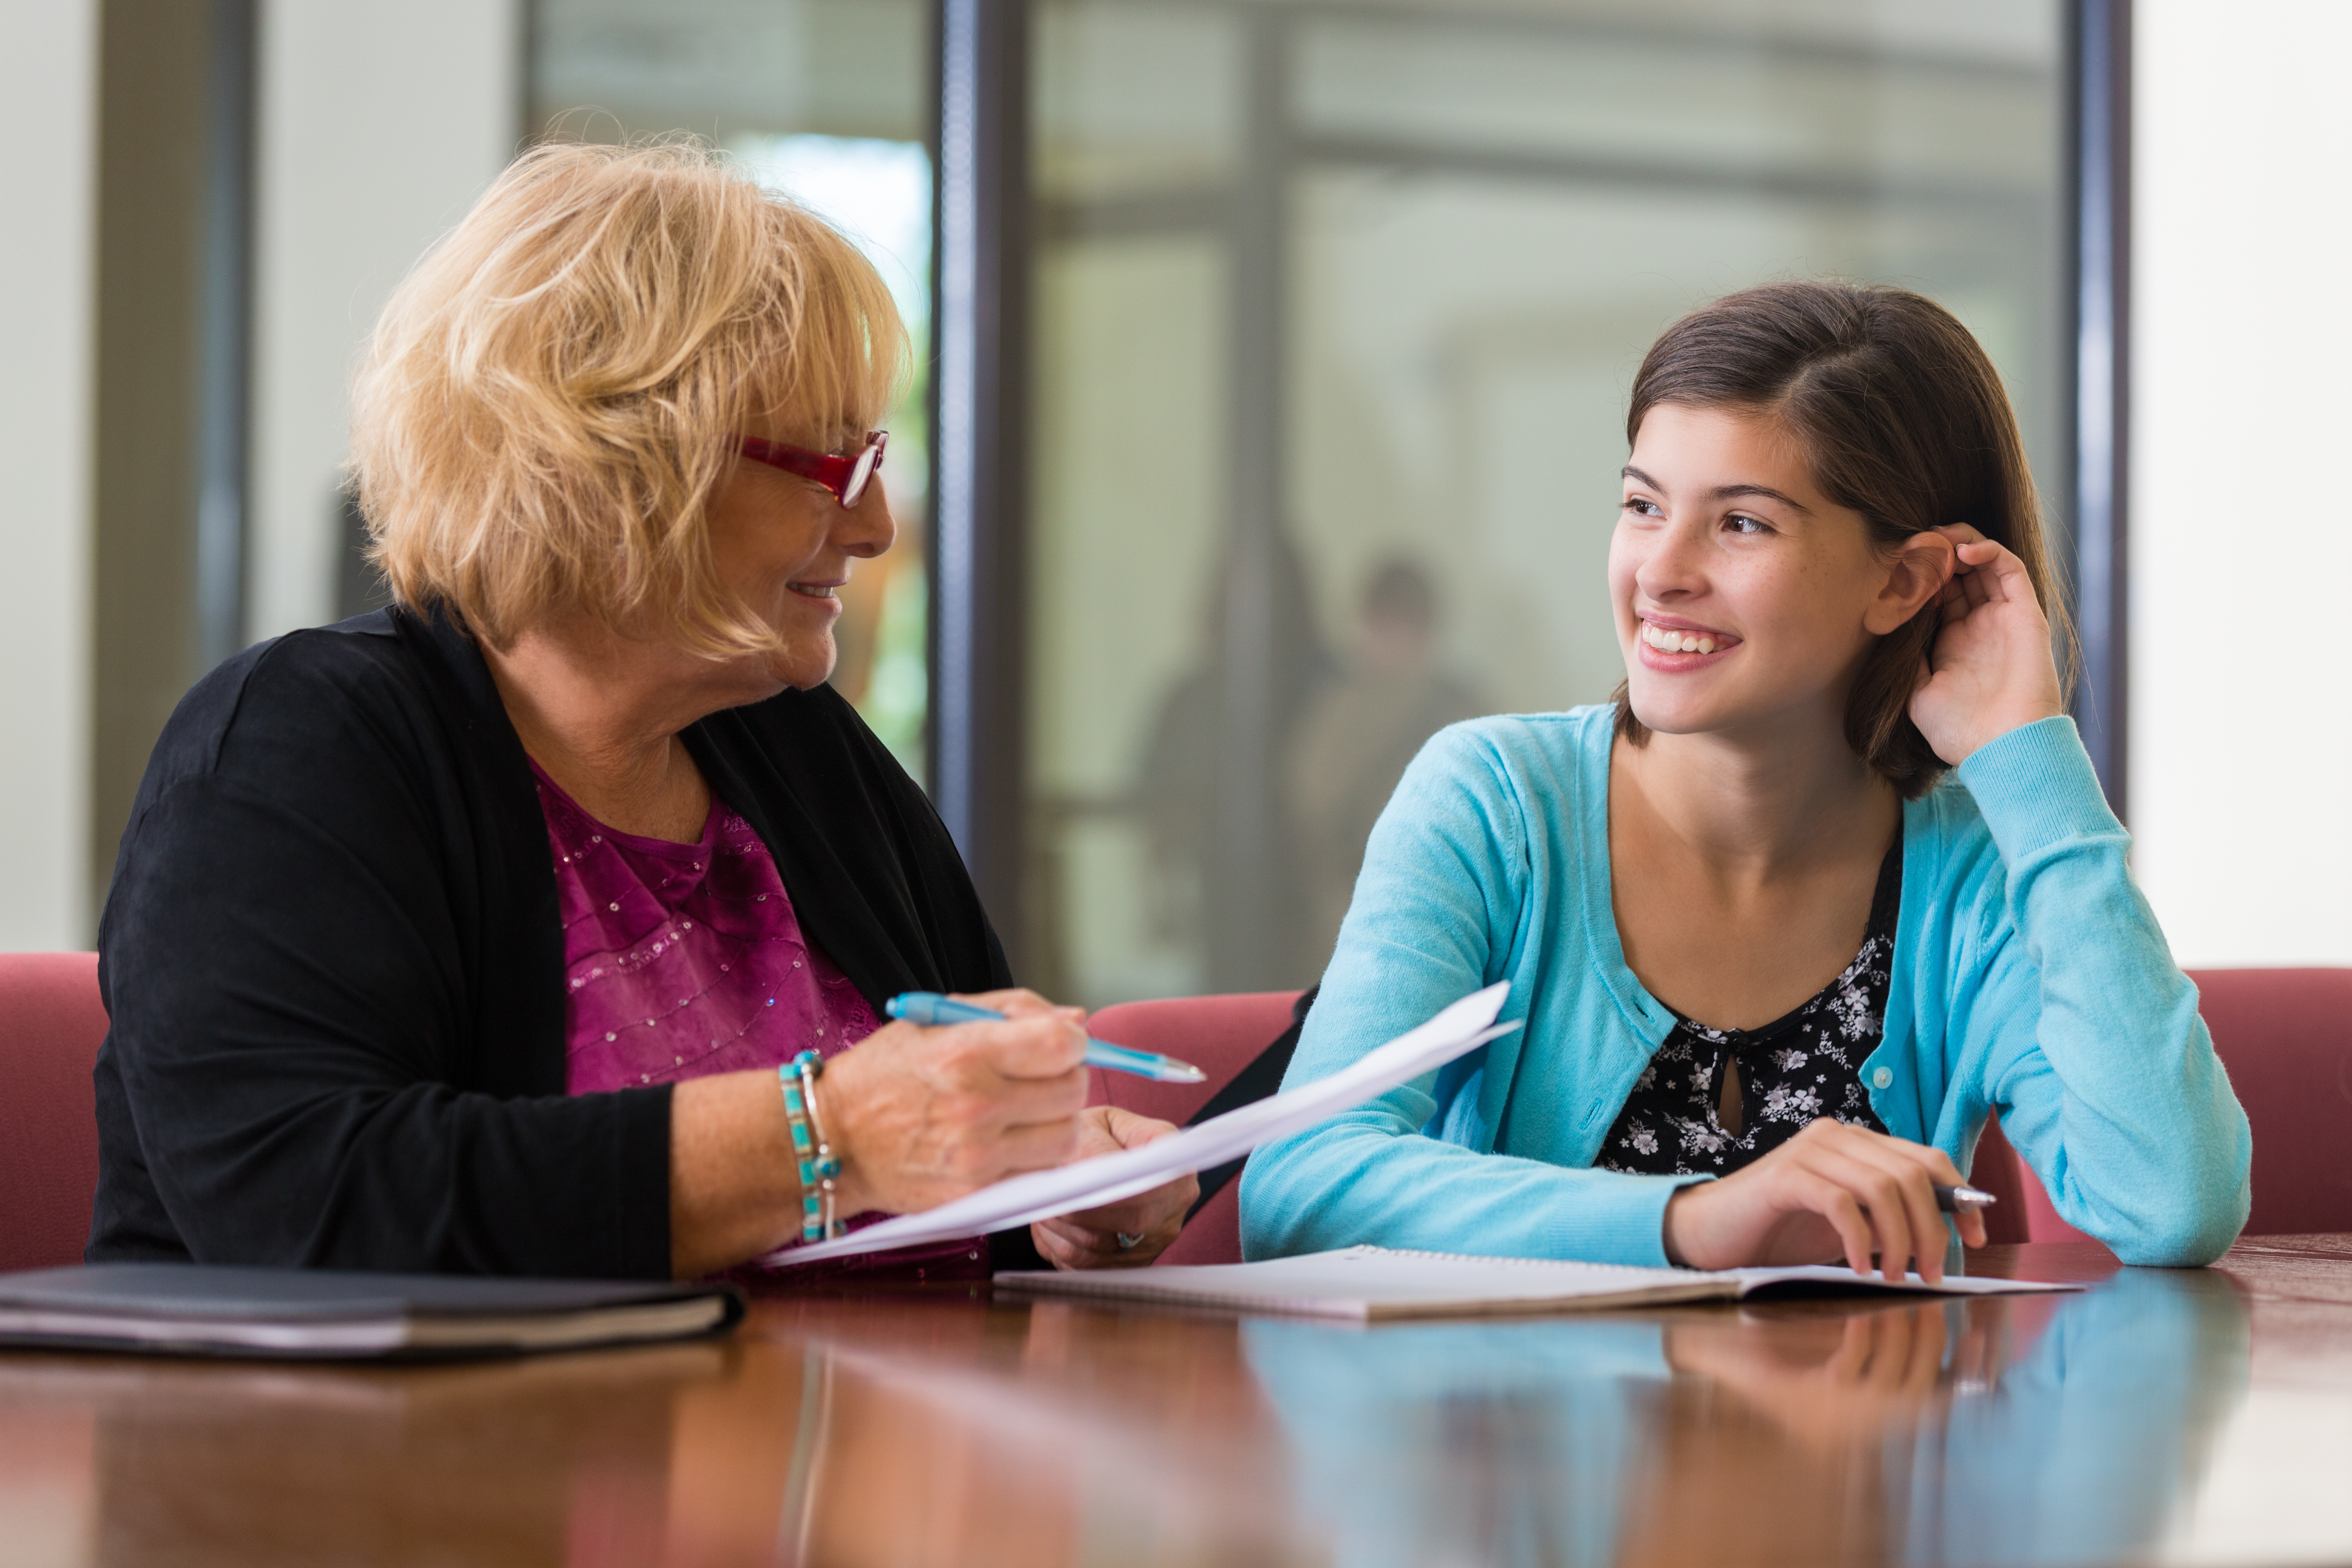 <p>Preteen girl meeting with school counselor or therapist</p>